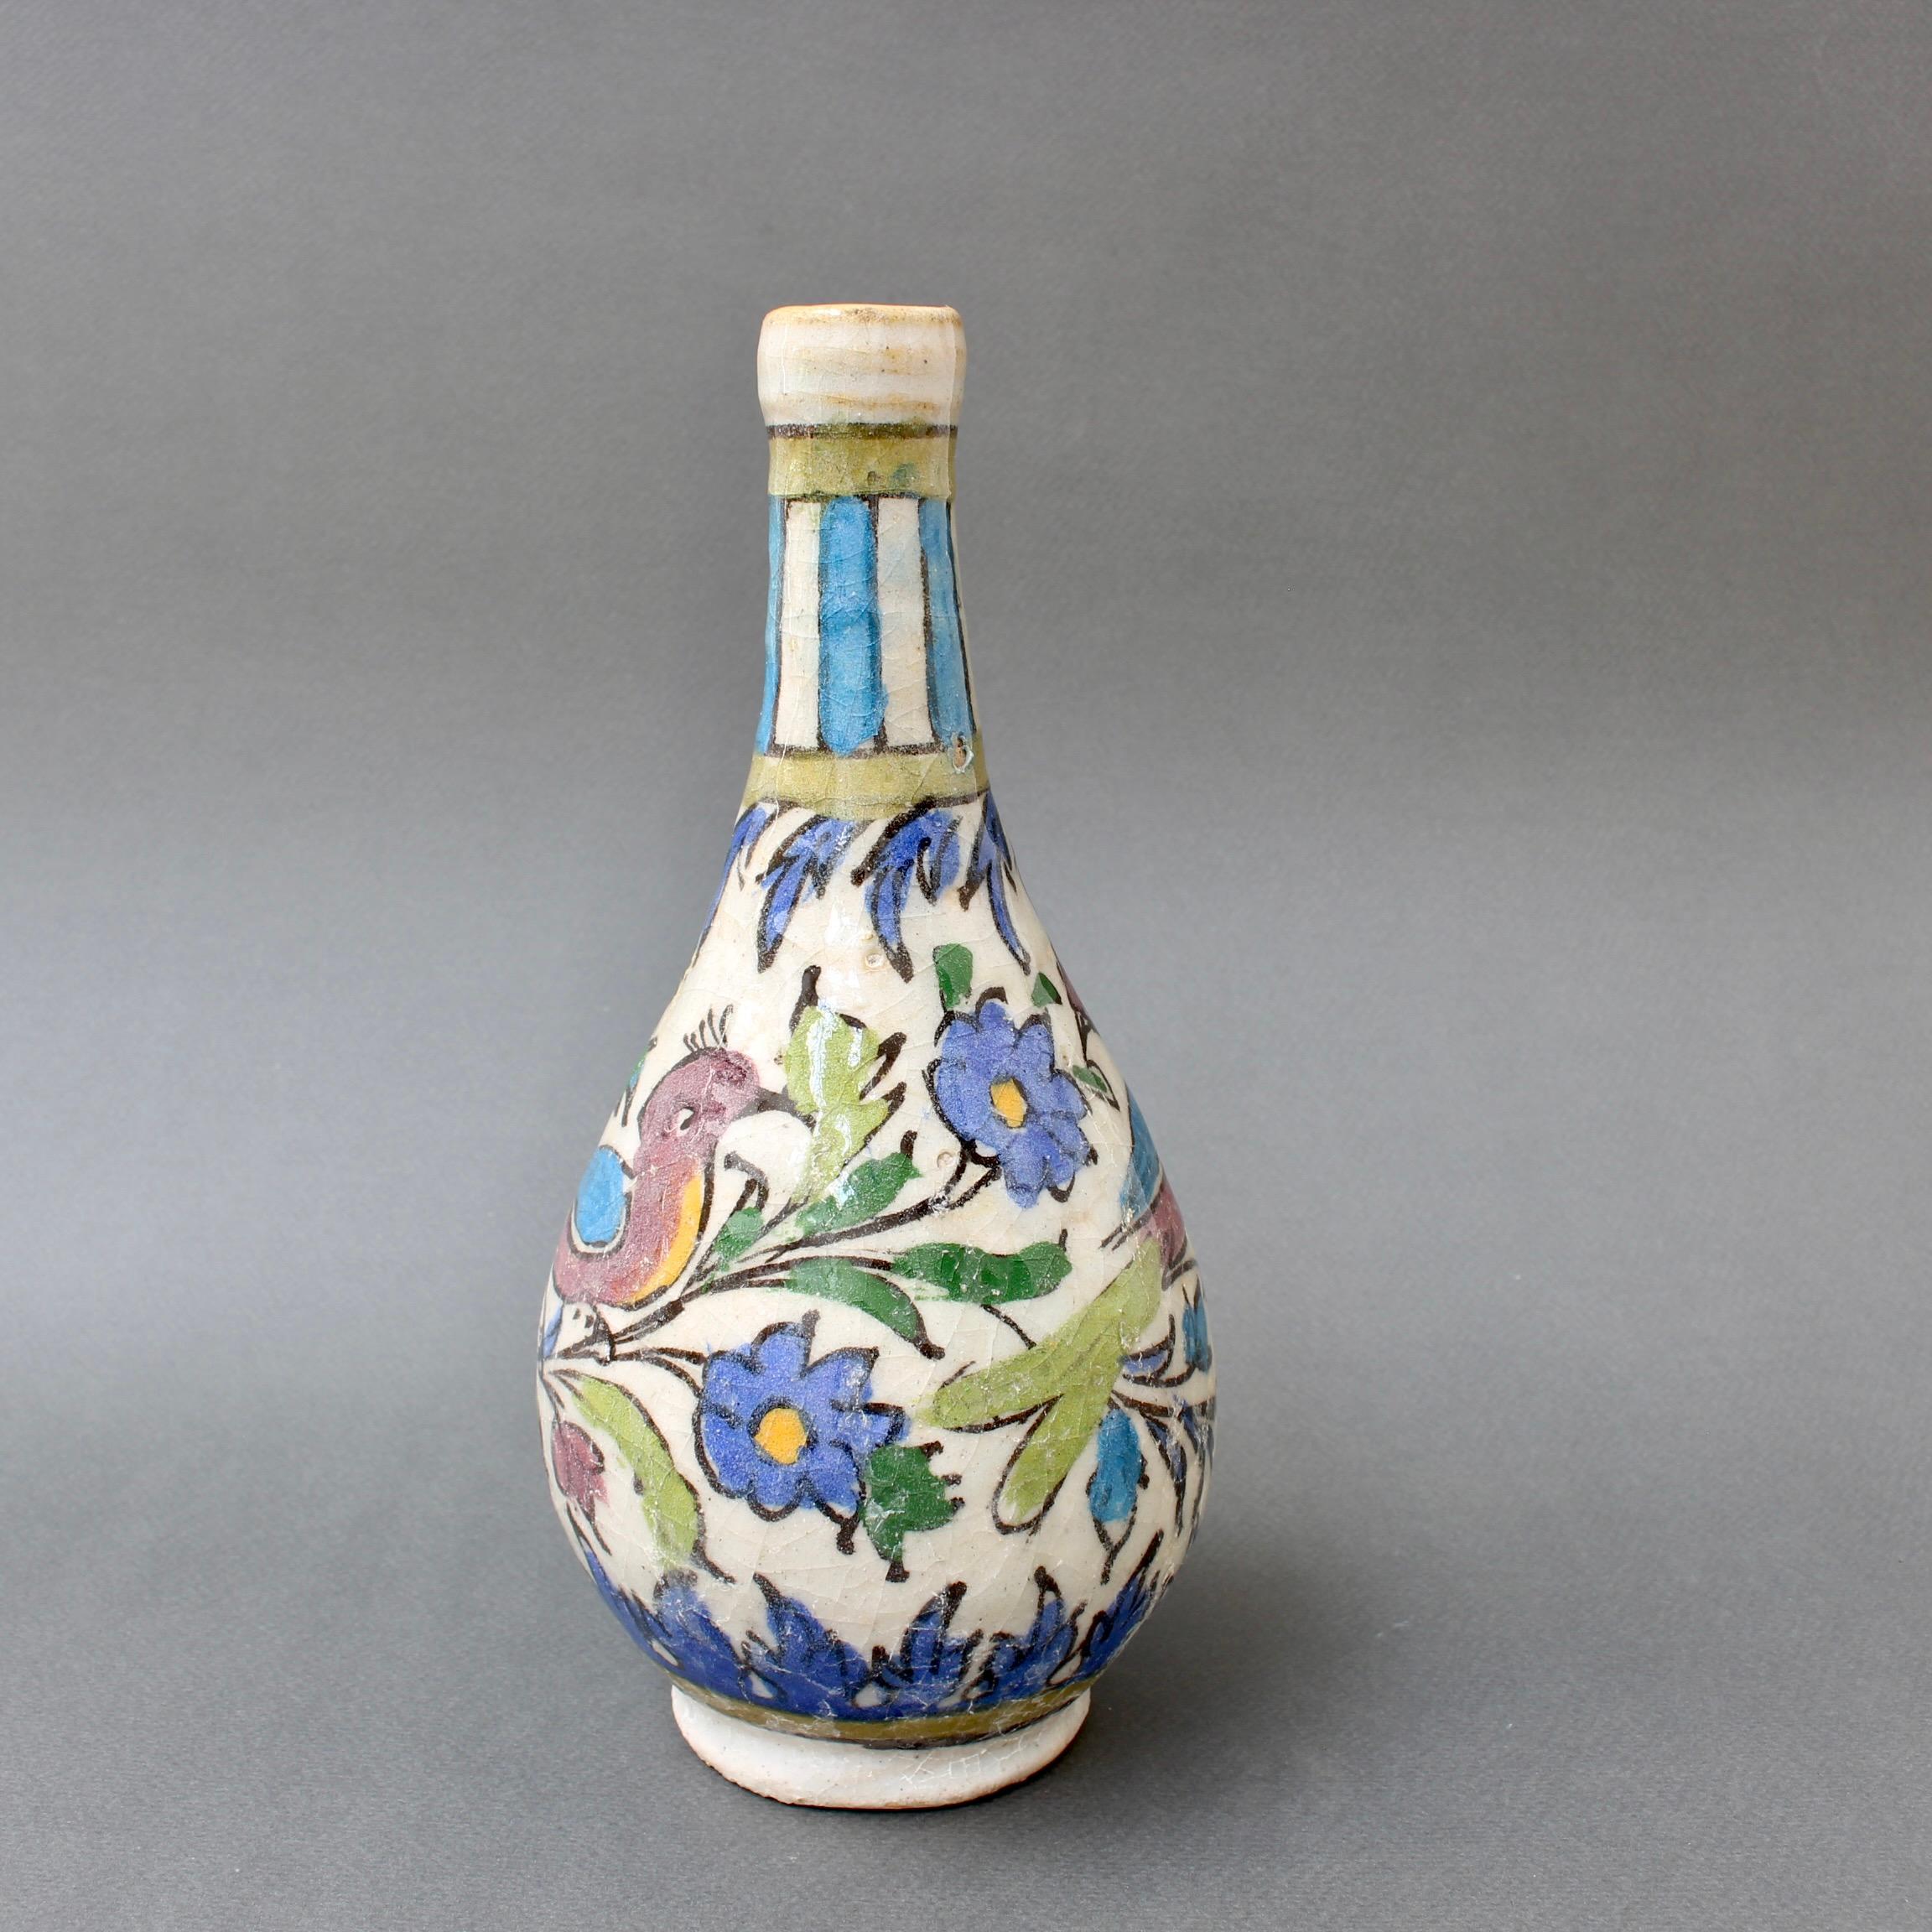 20th Century Persian ceramic flower vase. Discovered in the South of France, it was described by its previous owner as early 20th Century Iranian. It is glazed enamel with a bulbous body leading to a narrowed neck and opening in which several flower